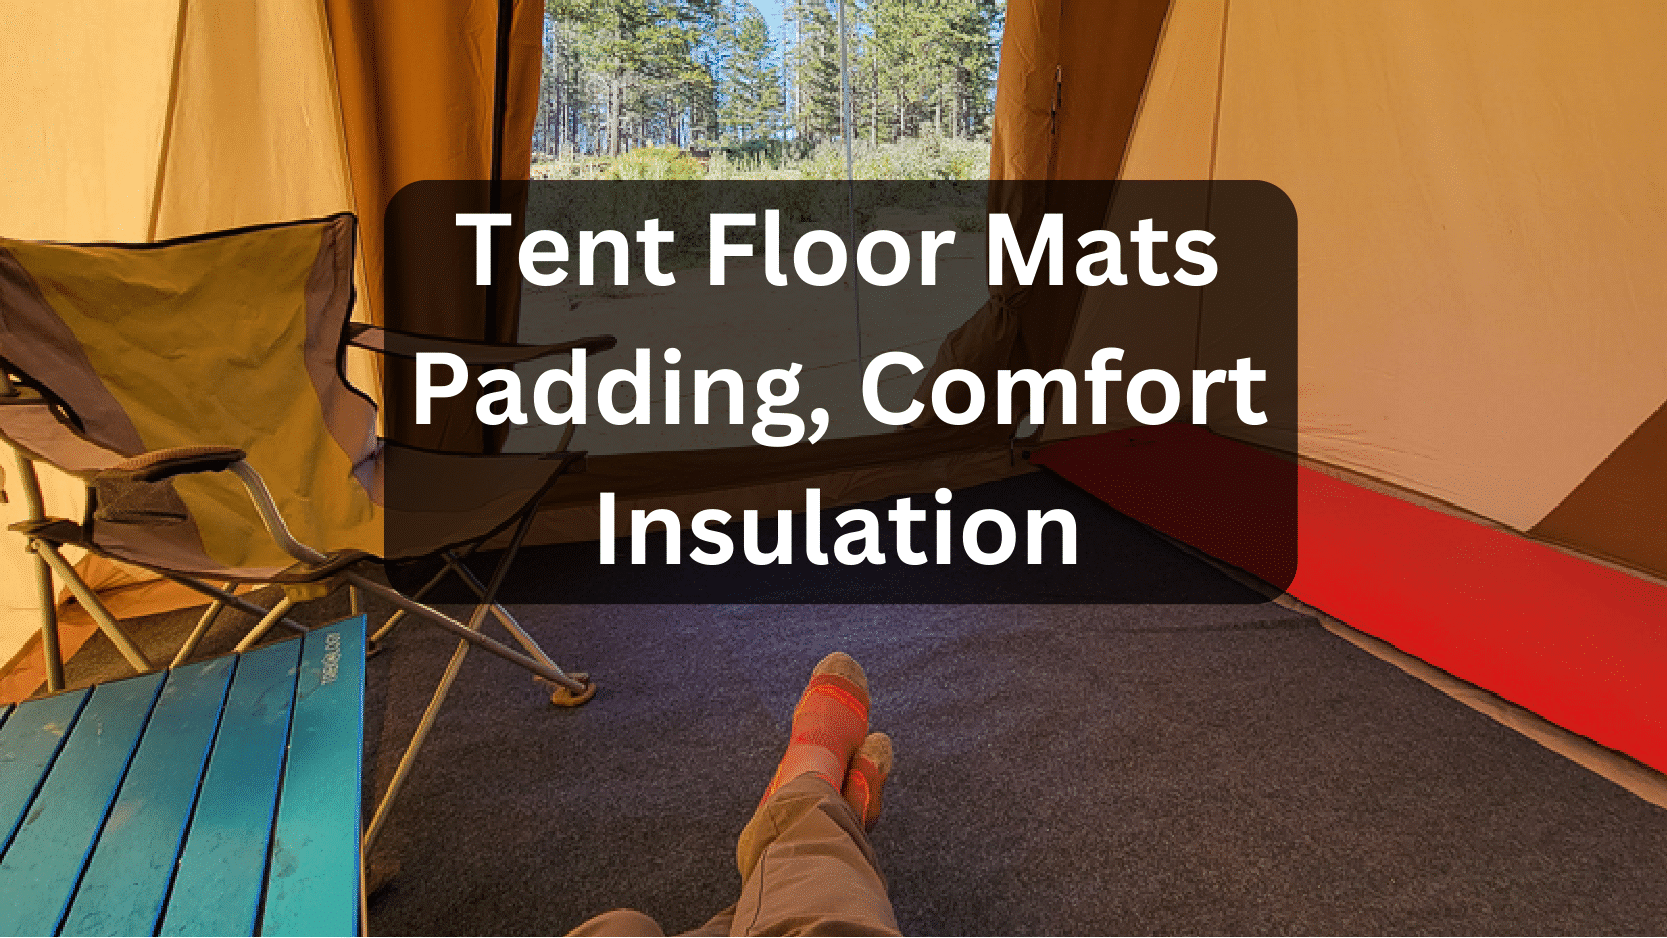 Best Tent Floor Mats Padding For Comfort And Insulation Wifi